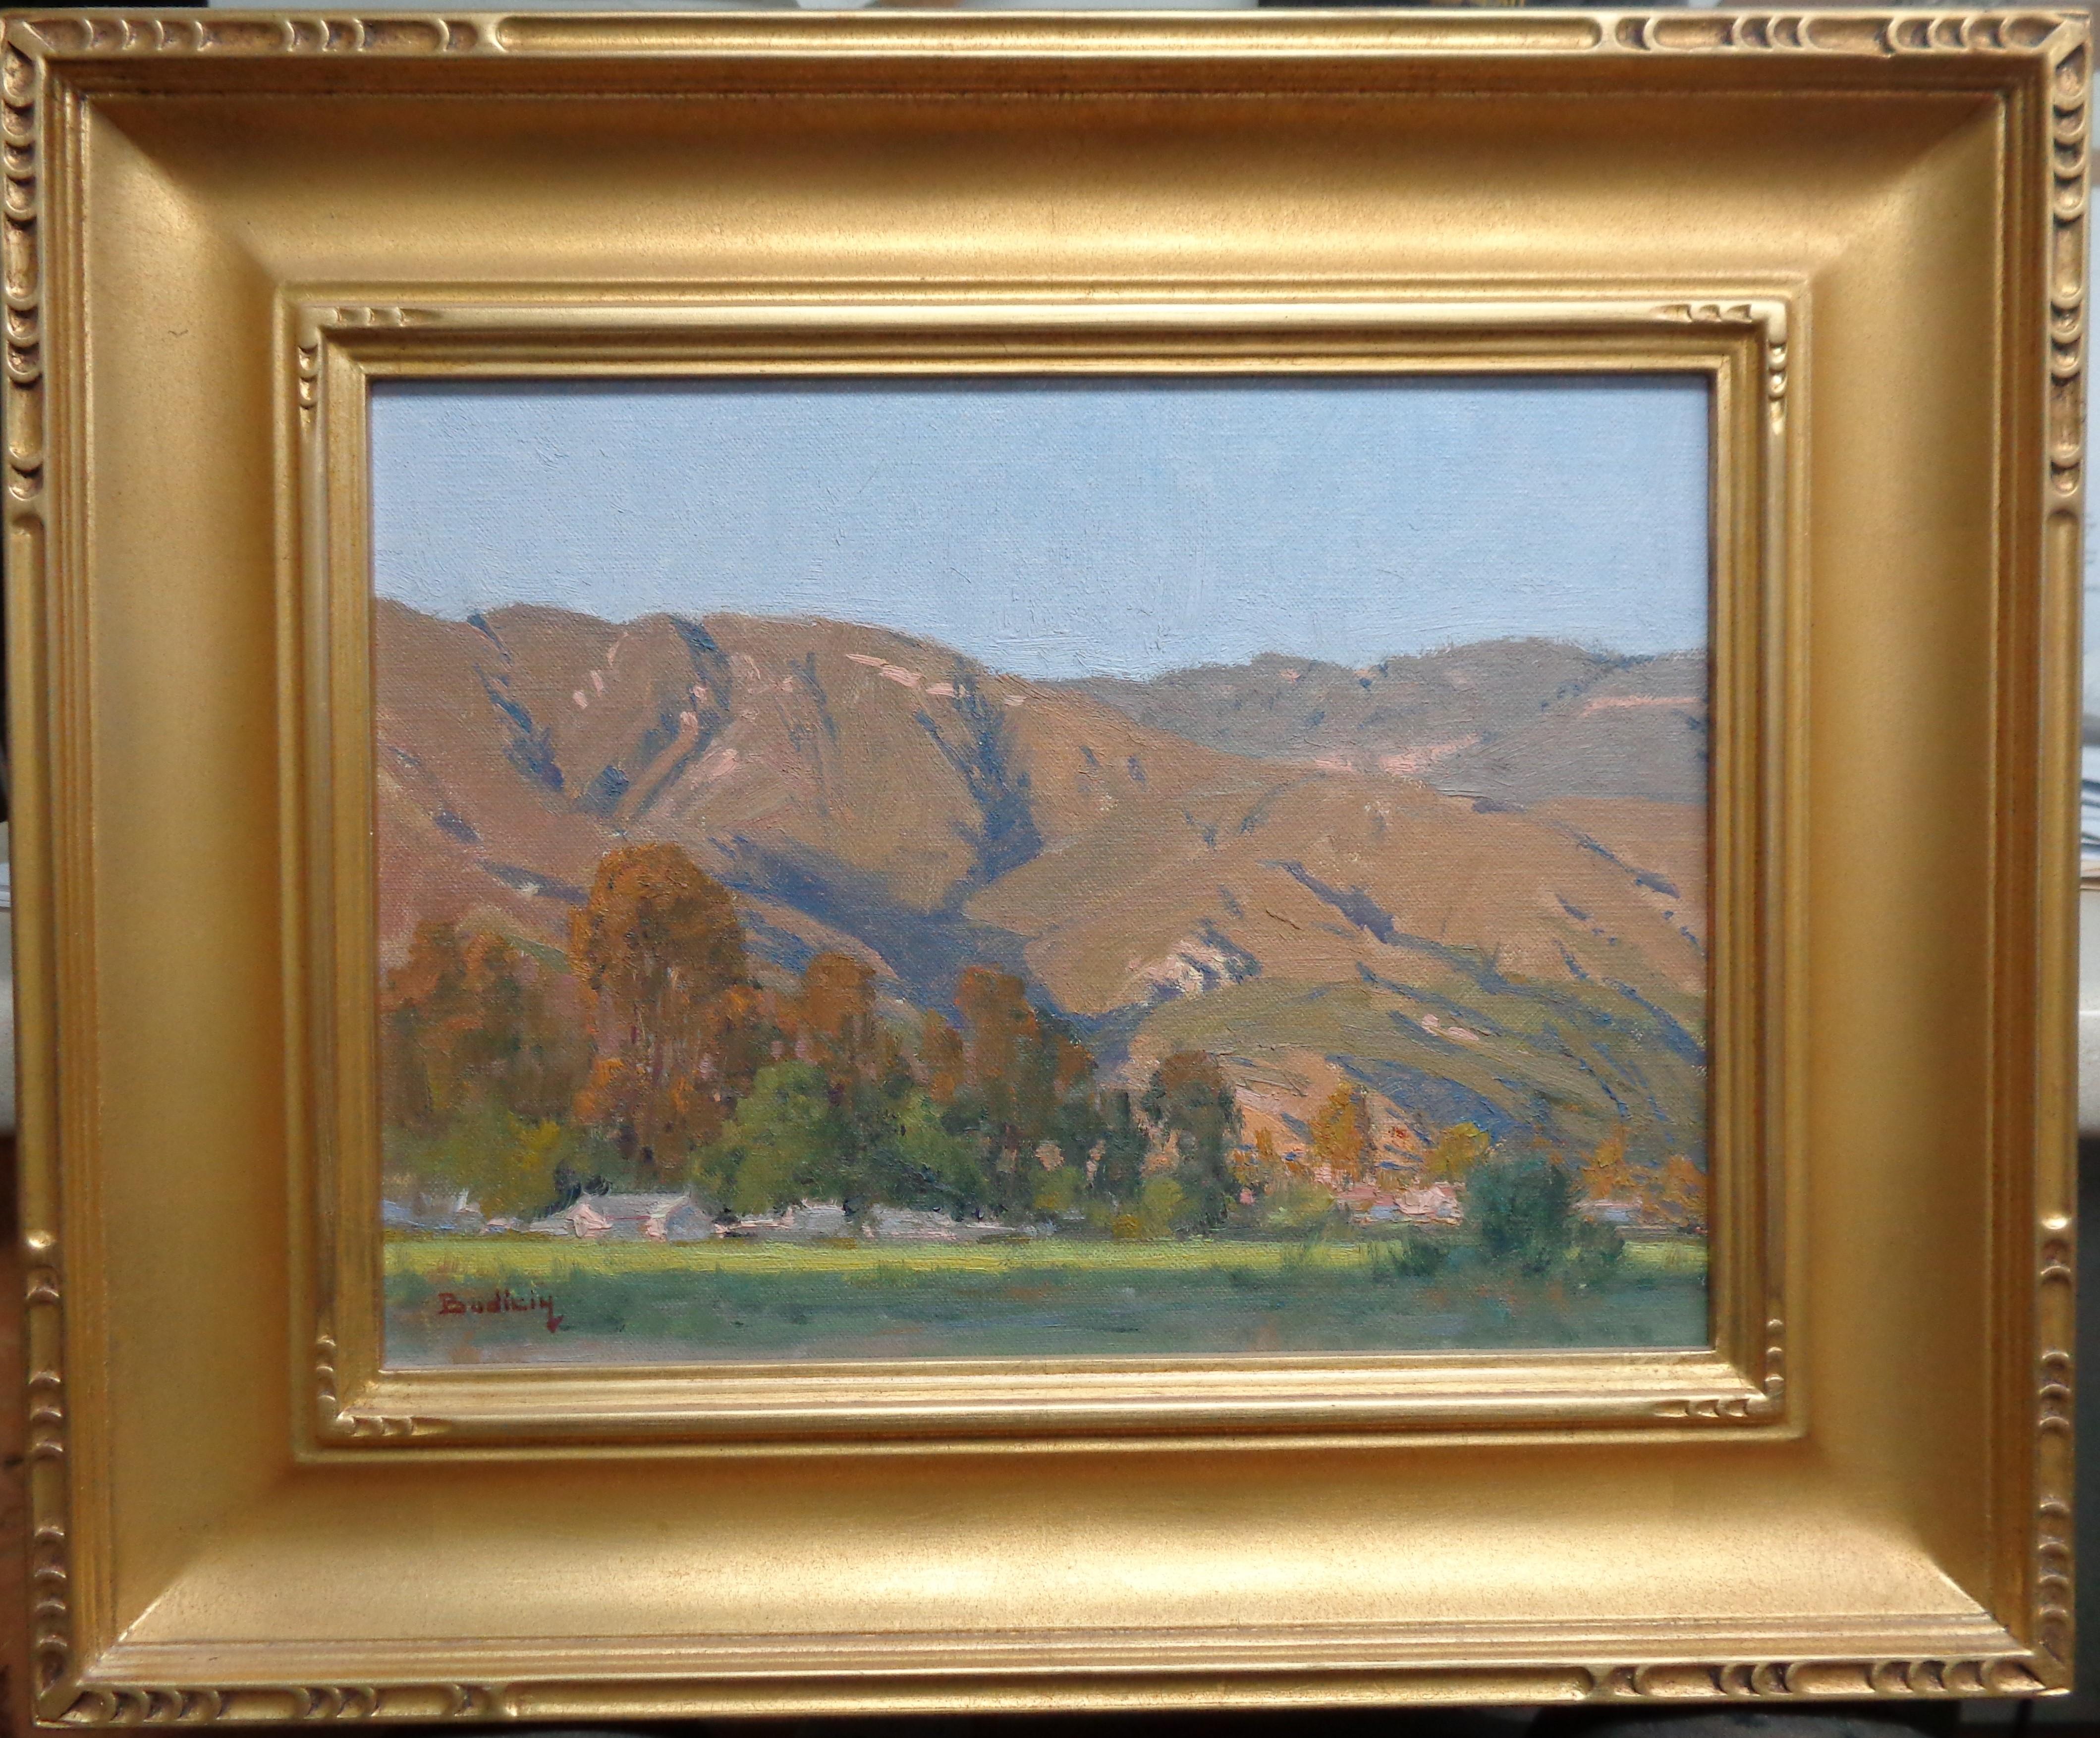 North Park, Kendall
oil/canvas laid to panel
image 9 x 12
Purchased from the artist in 2003. This is a beautiful plein air painting done in North Park, Kendall. This is one of three Budicin paintings I have listed here available for purchase.

Born